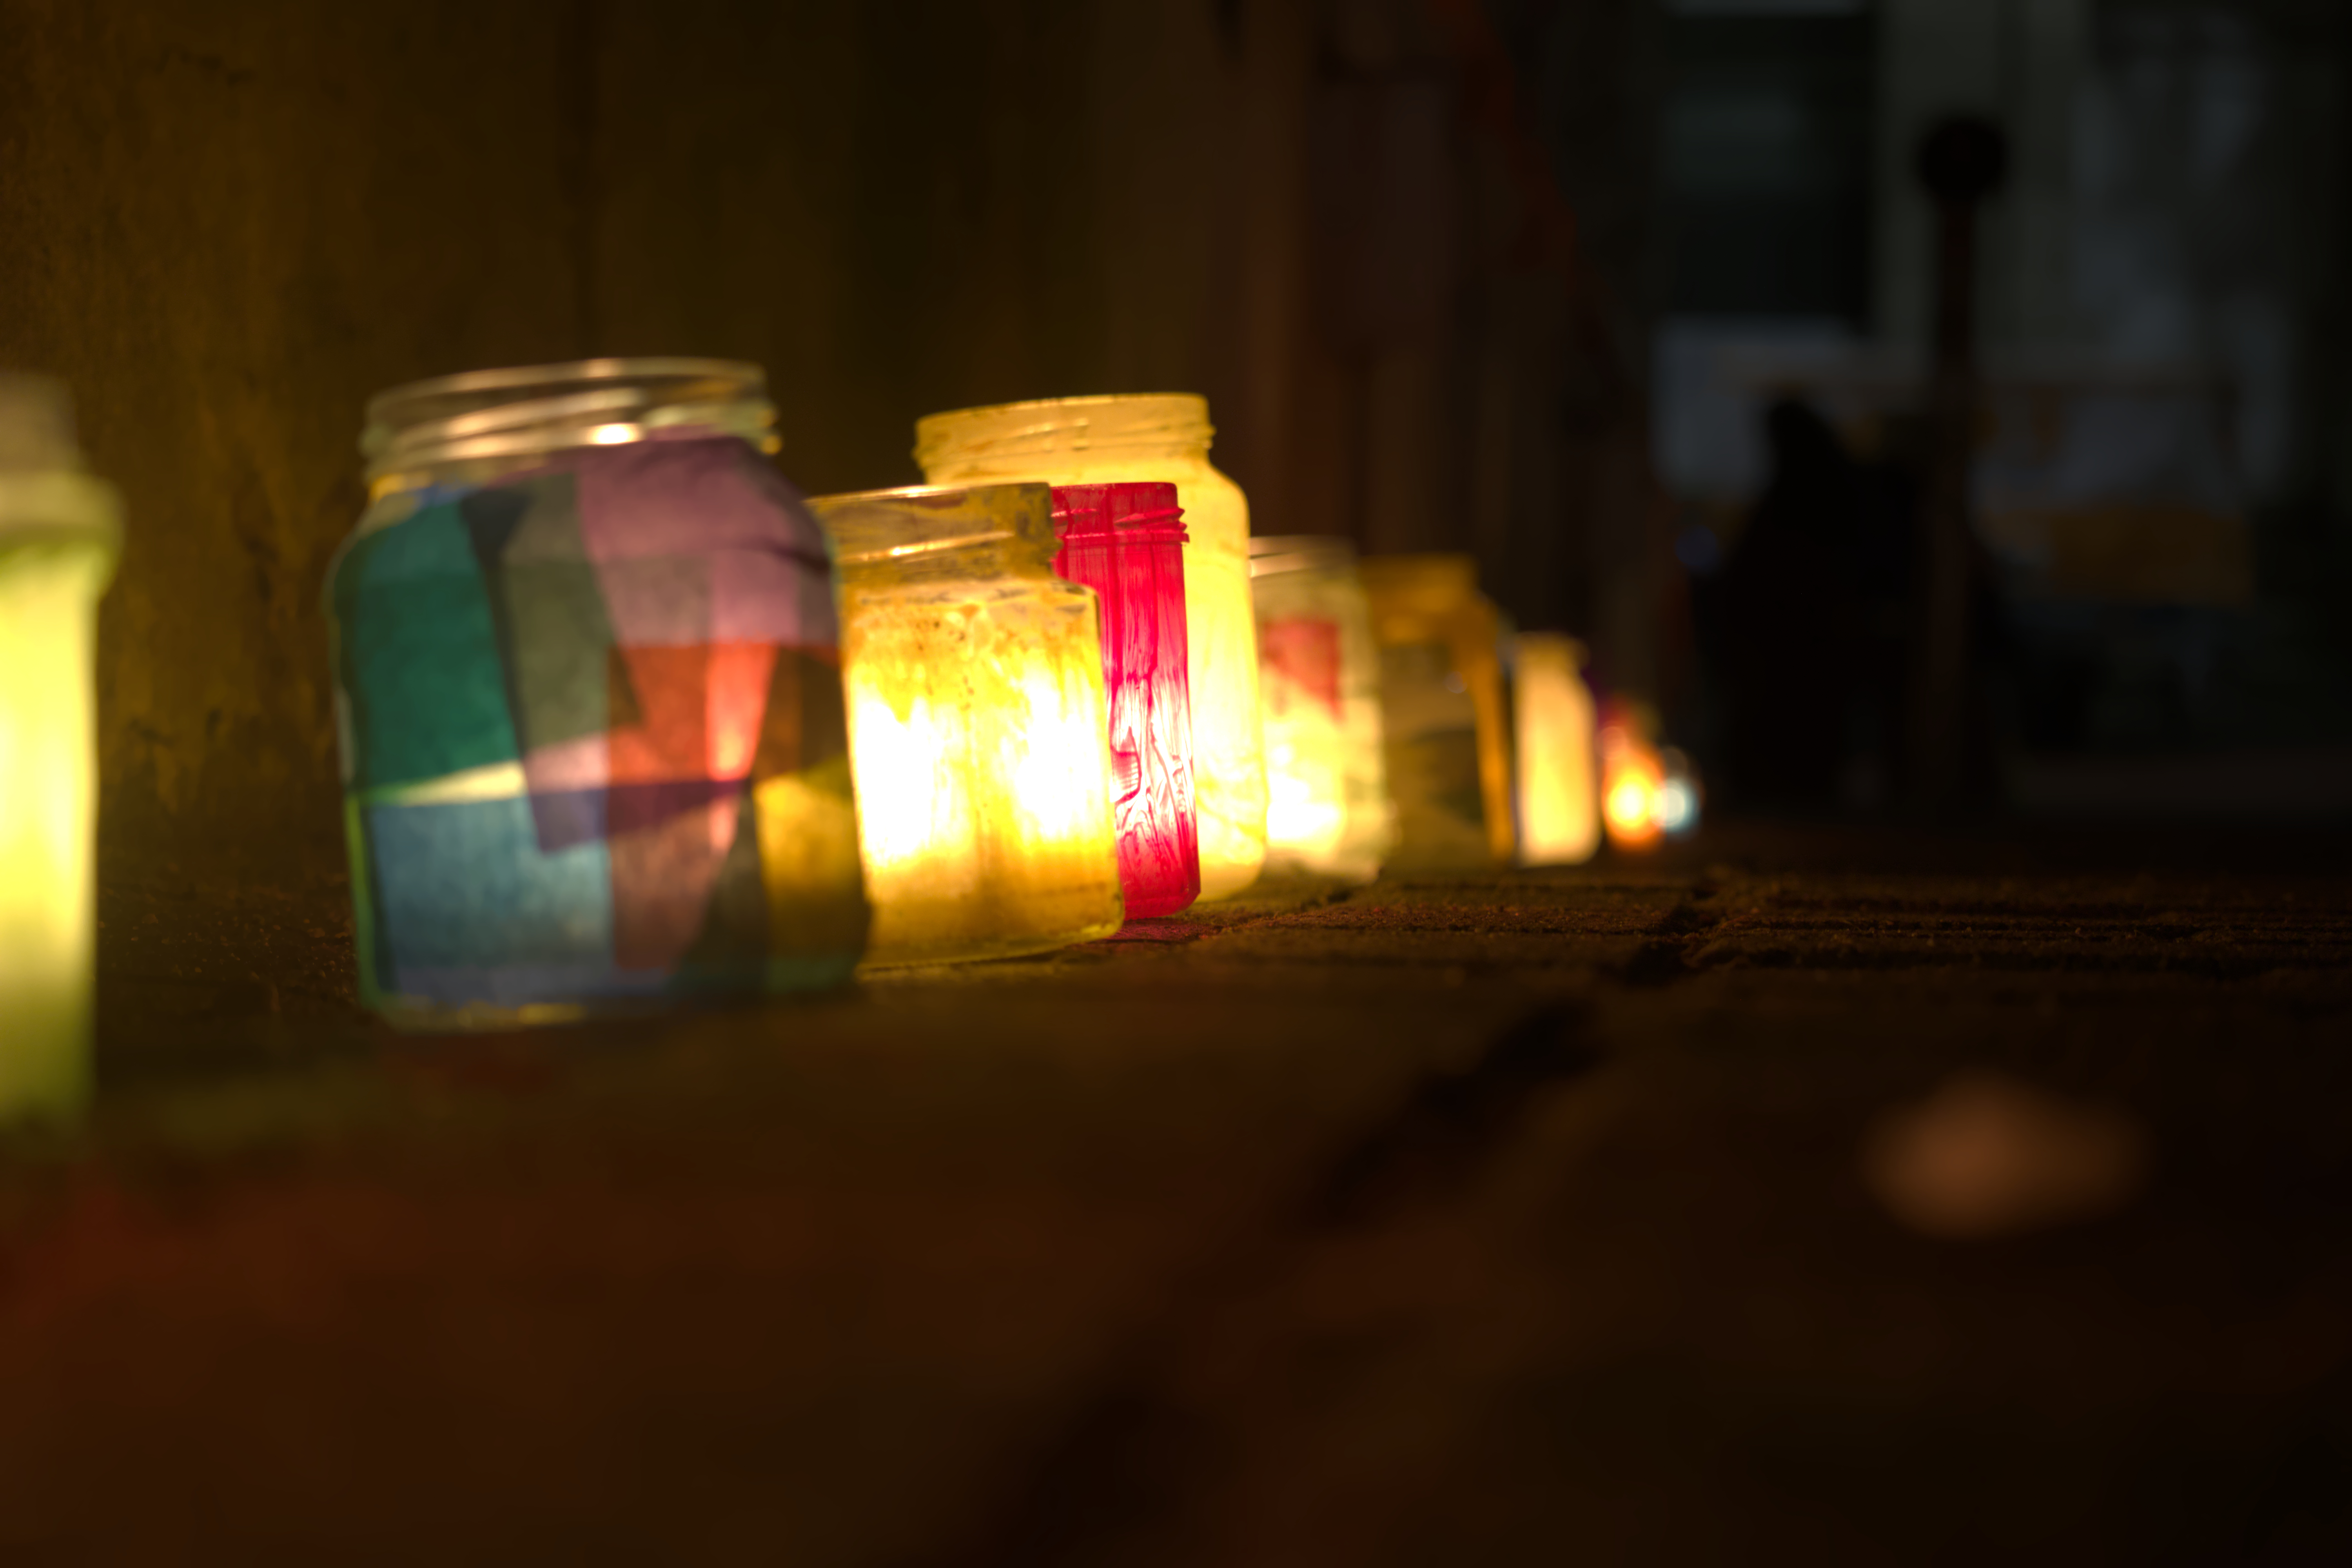 A row of colorfull glasses filled with candles glowing onto the pavement